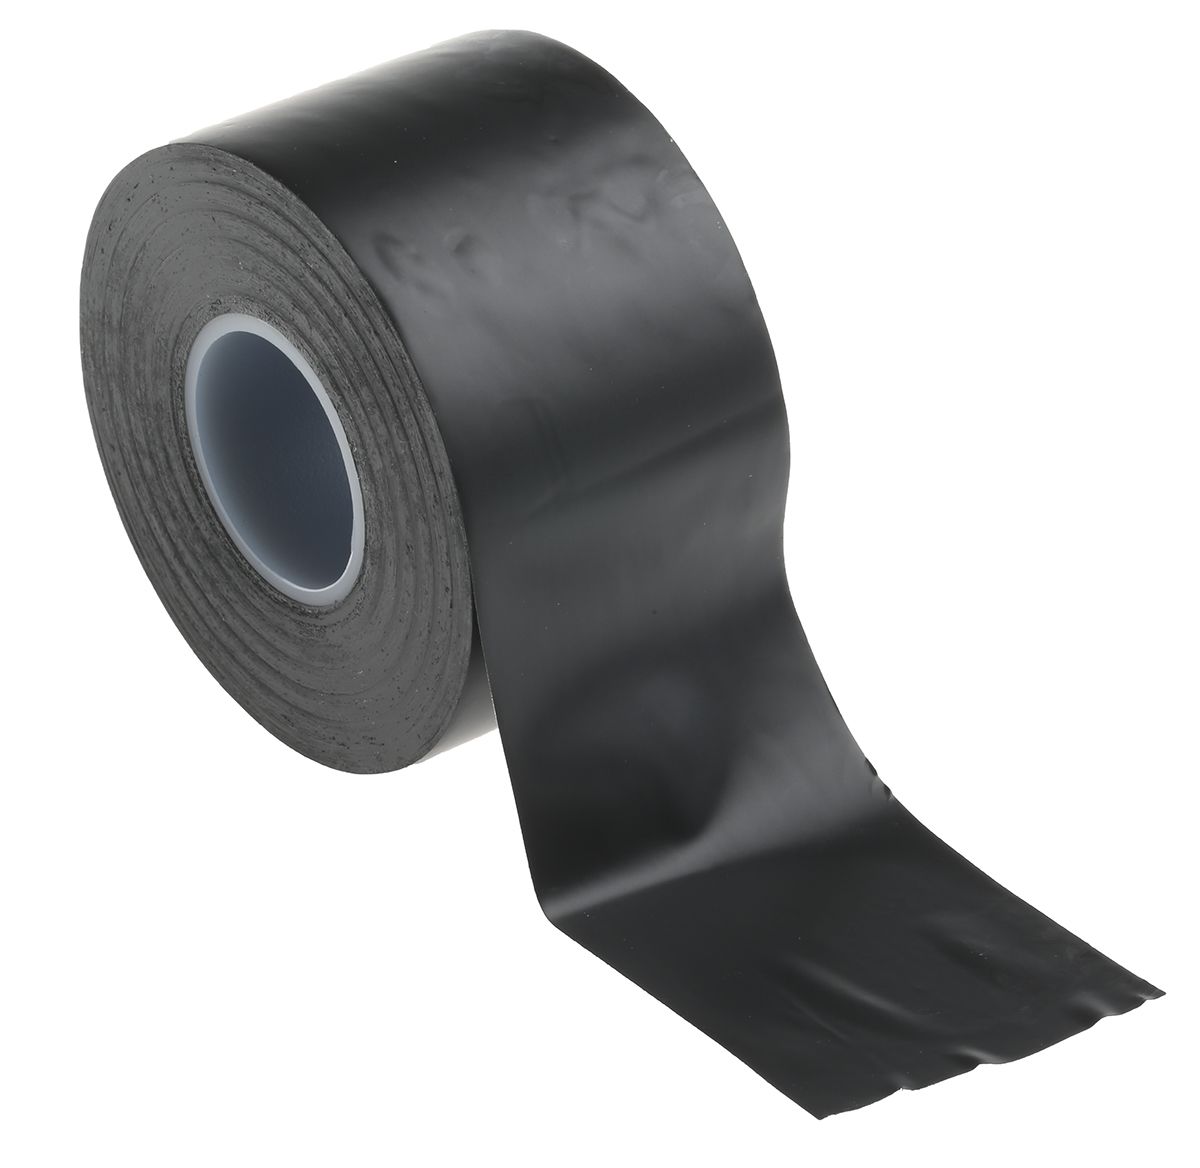 Advance Tapes AT7 Black PVC Electrical Tape, 38mm x 20m